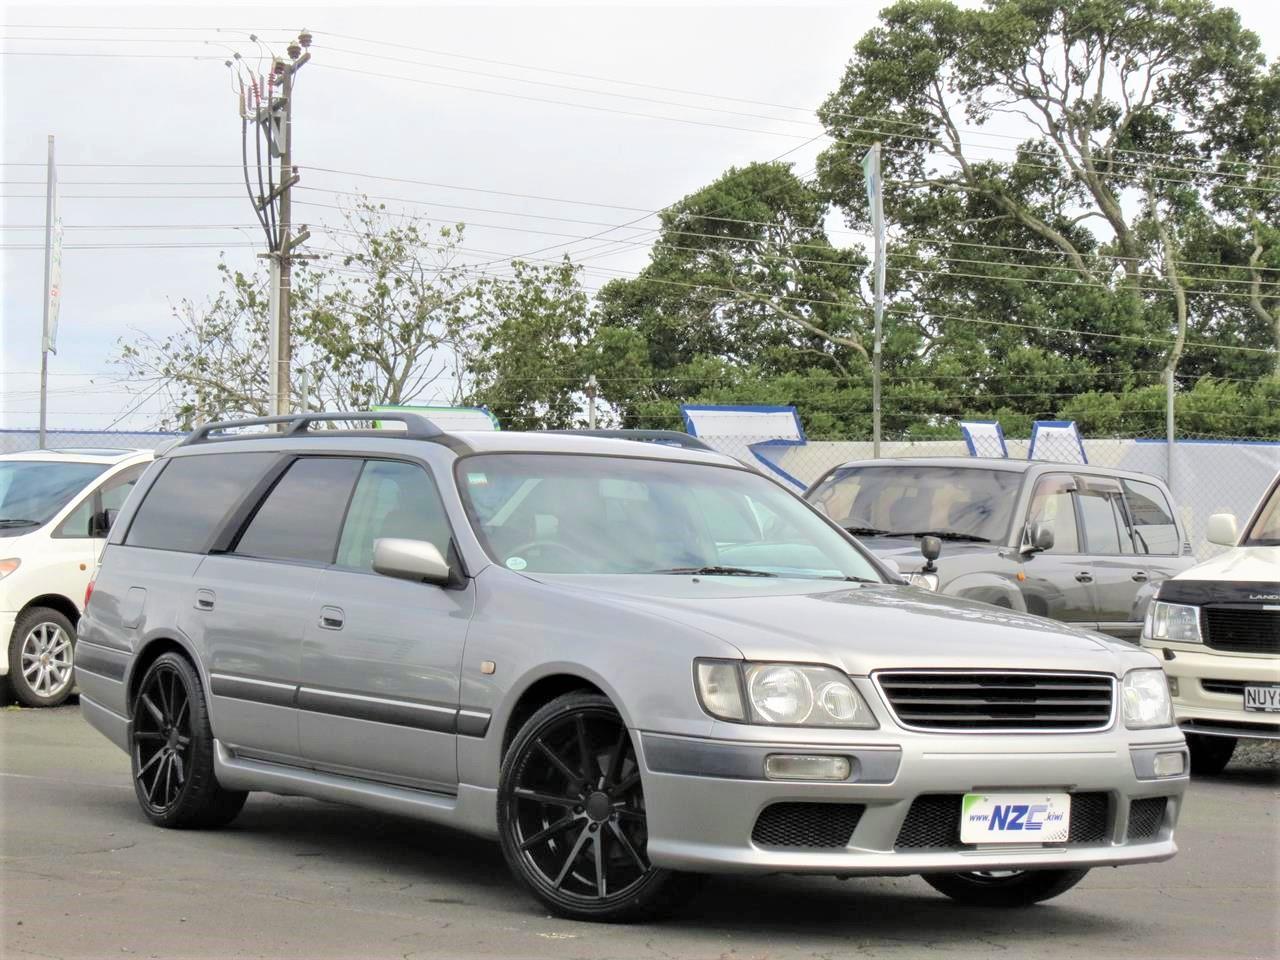 NZC 1998 Nissan Stagea just arrived to Auckland